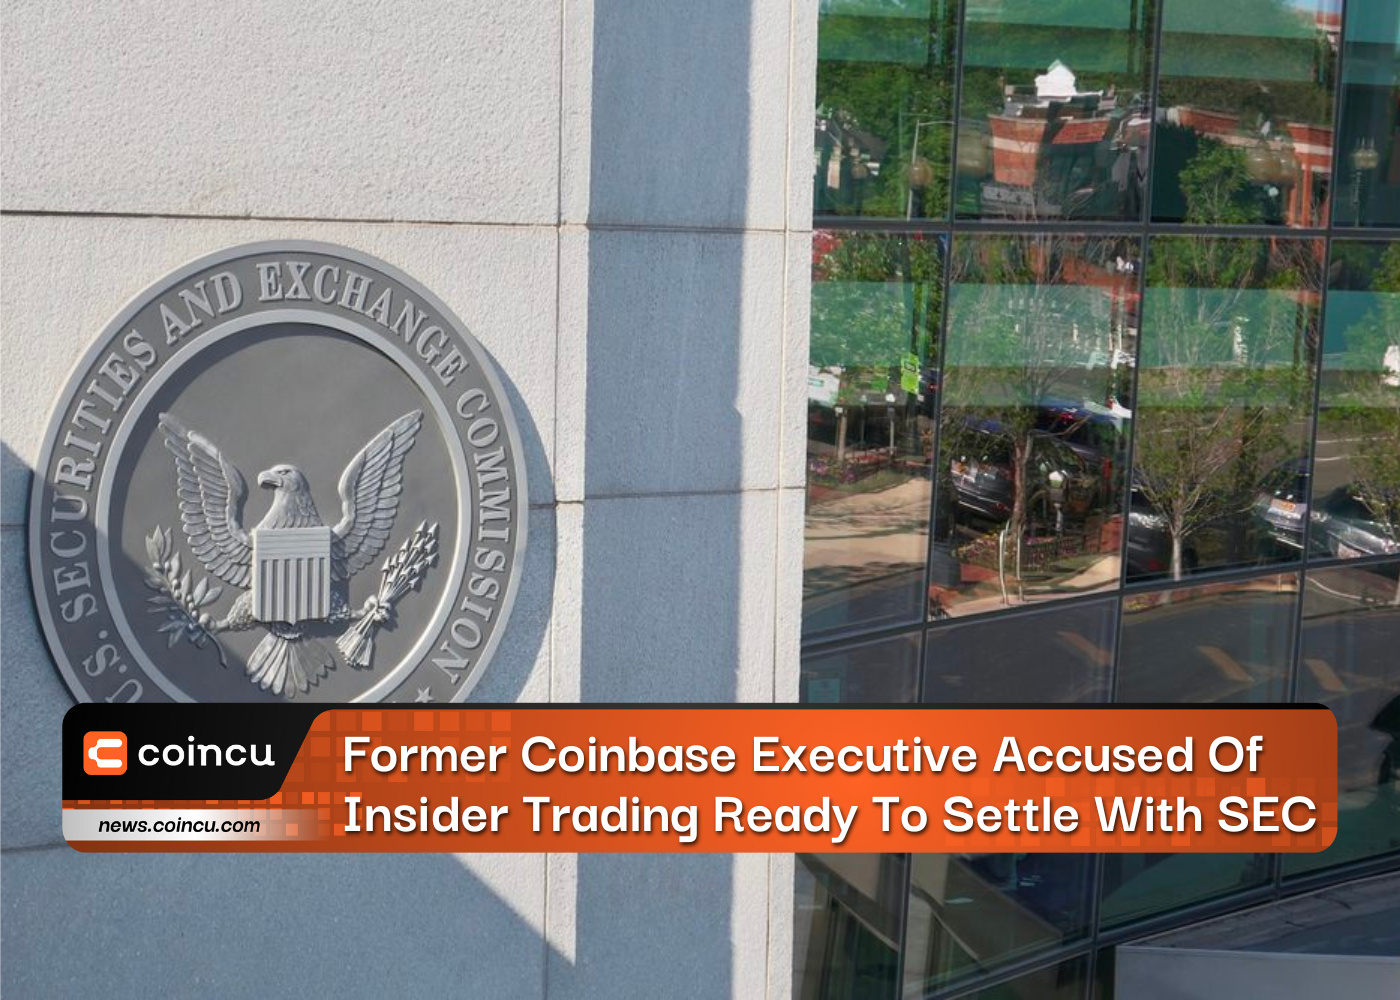 Former Coinbase Executive Accused Of Insider Trading Ready To Settle With SEC